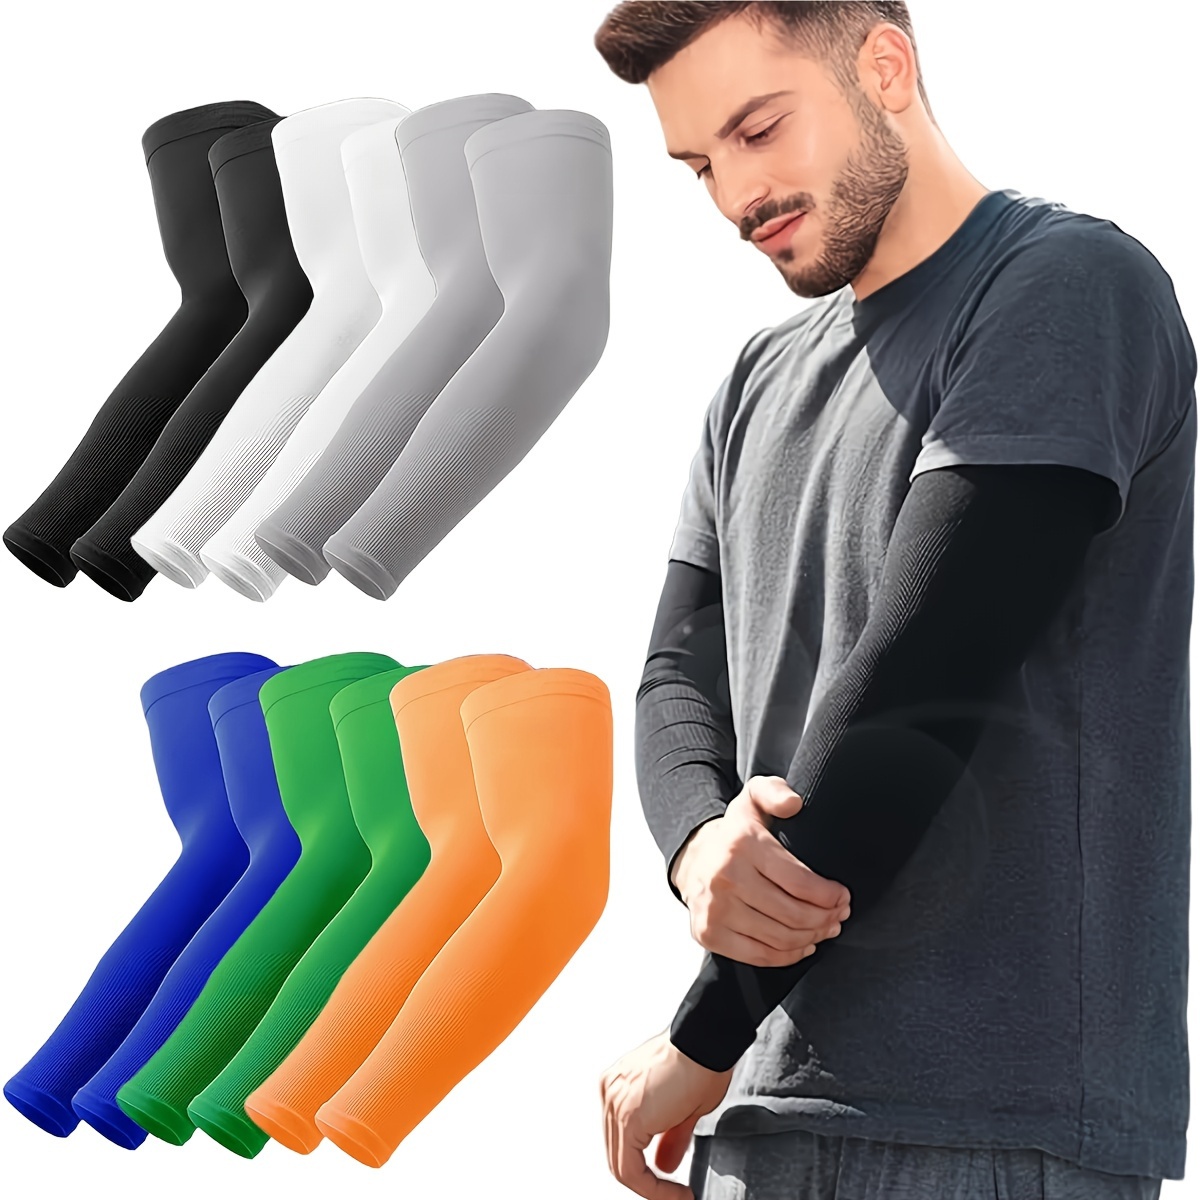 

4pairs Uv Protection Colorful Arm Sleeves For Men Women, Cooling Sleeves For Sports Workouts, Tattoo Cover Up